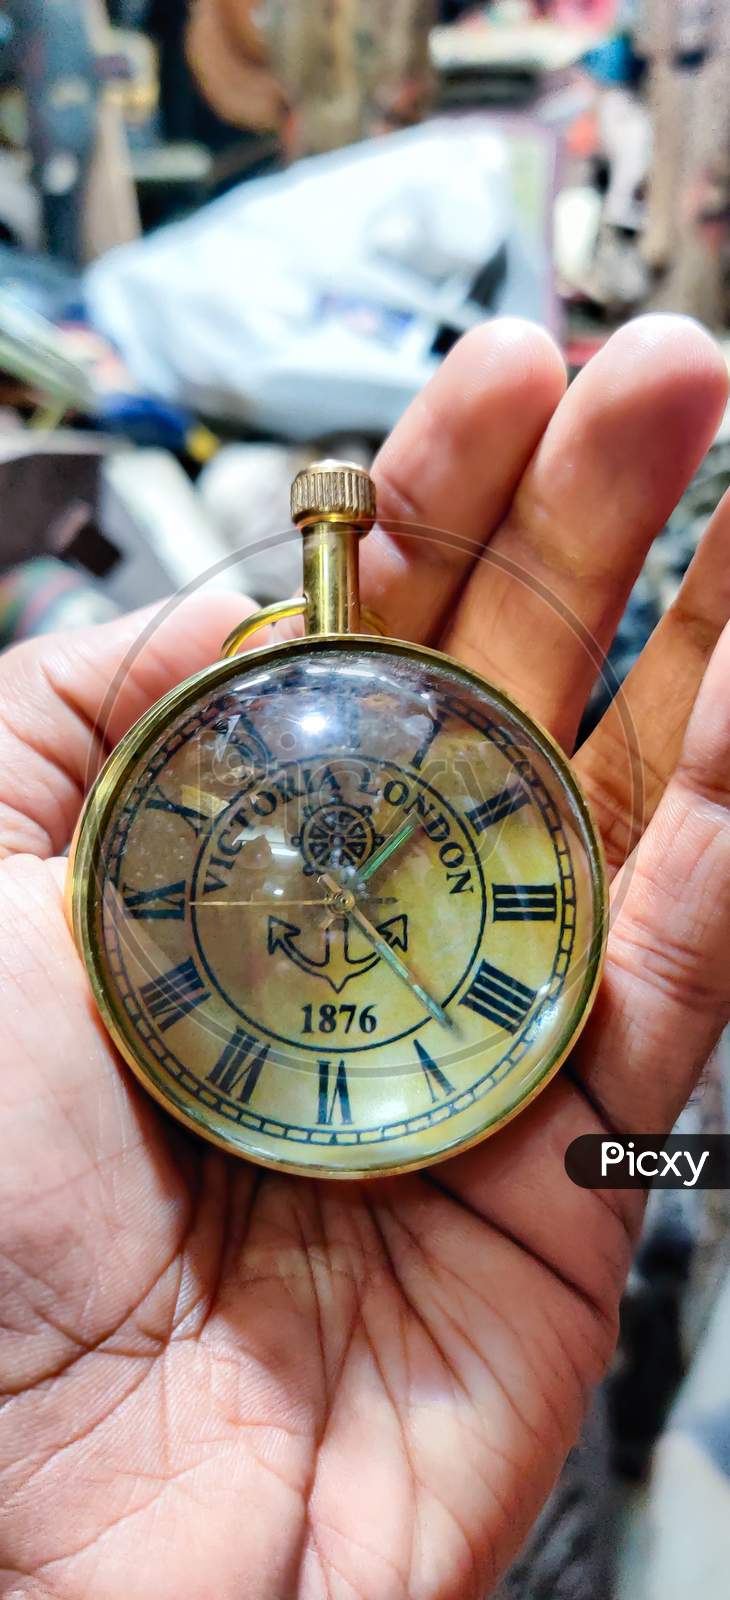 Vintage Golden Pocket Watch On The Chain In Hand On Rock Background, Time Concept